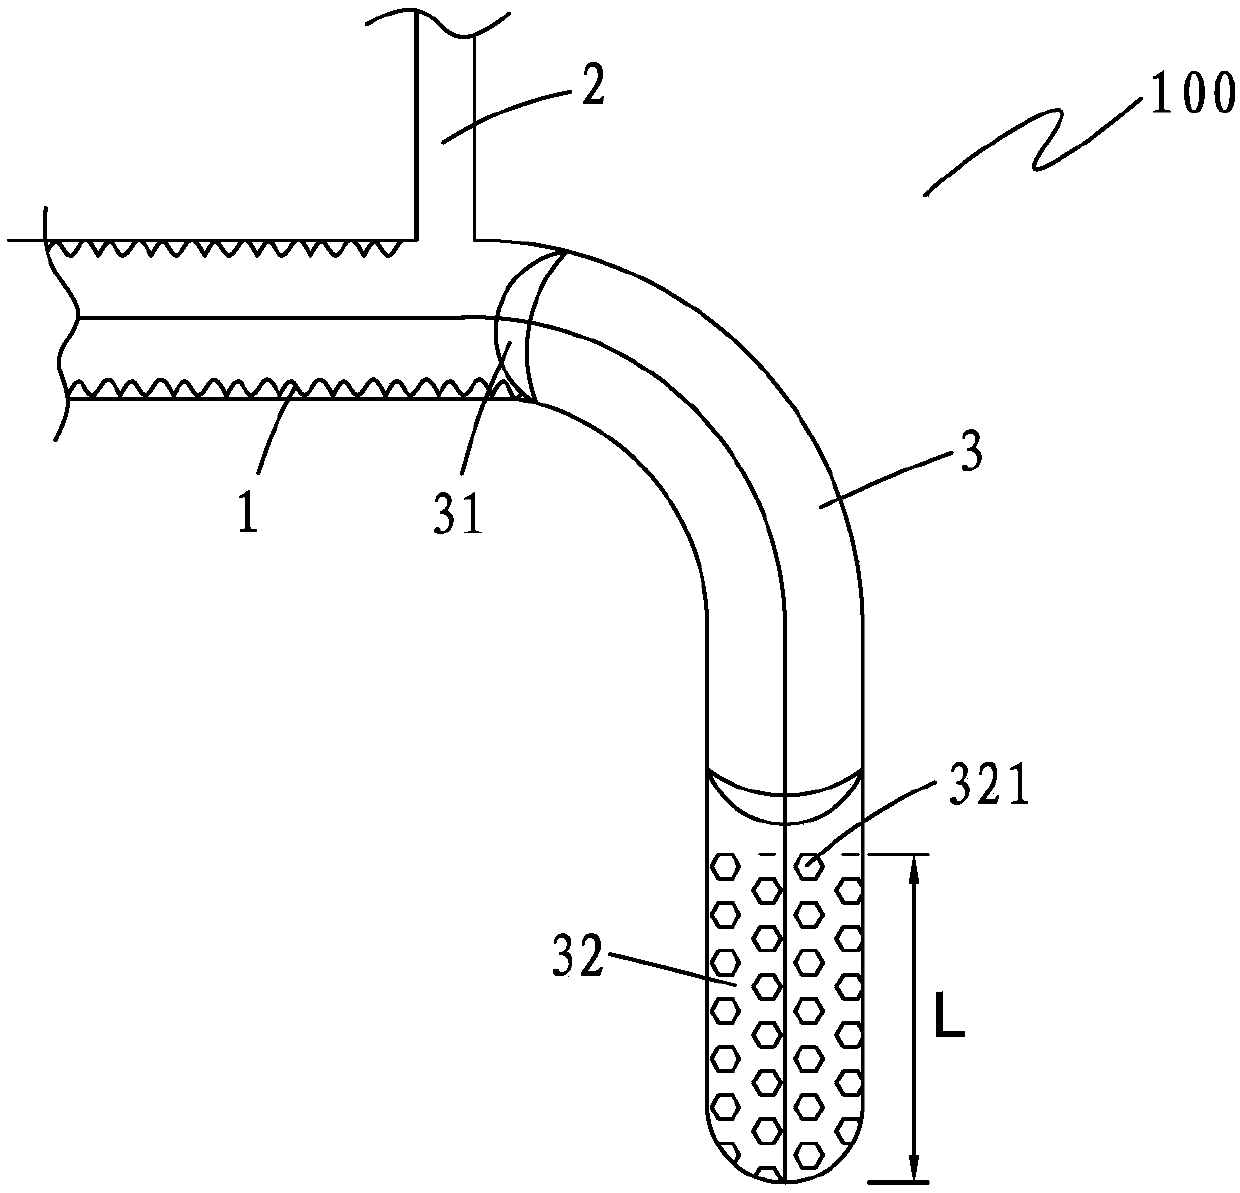 Compound type human great artery intraoperative stent system